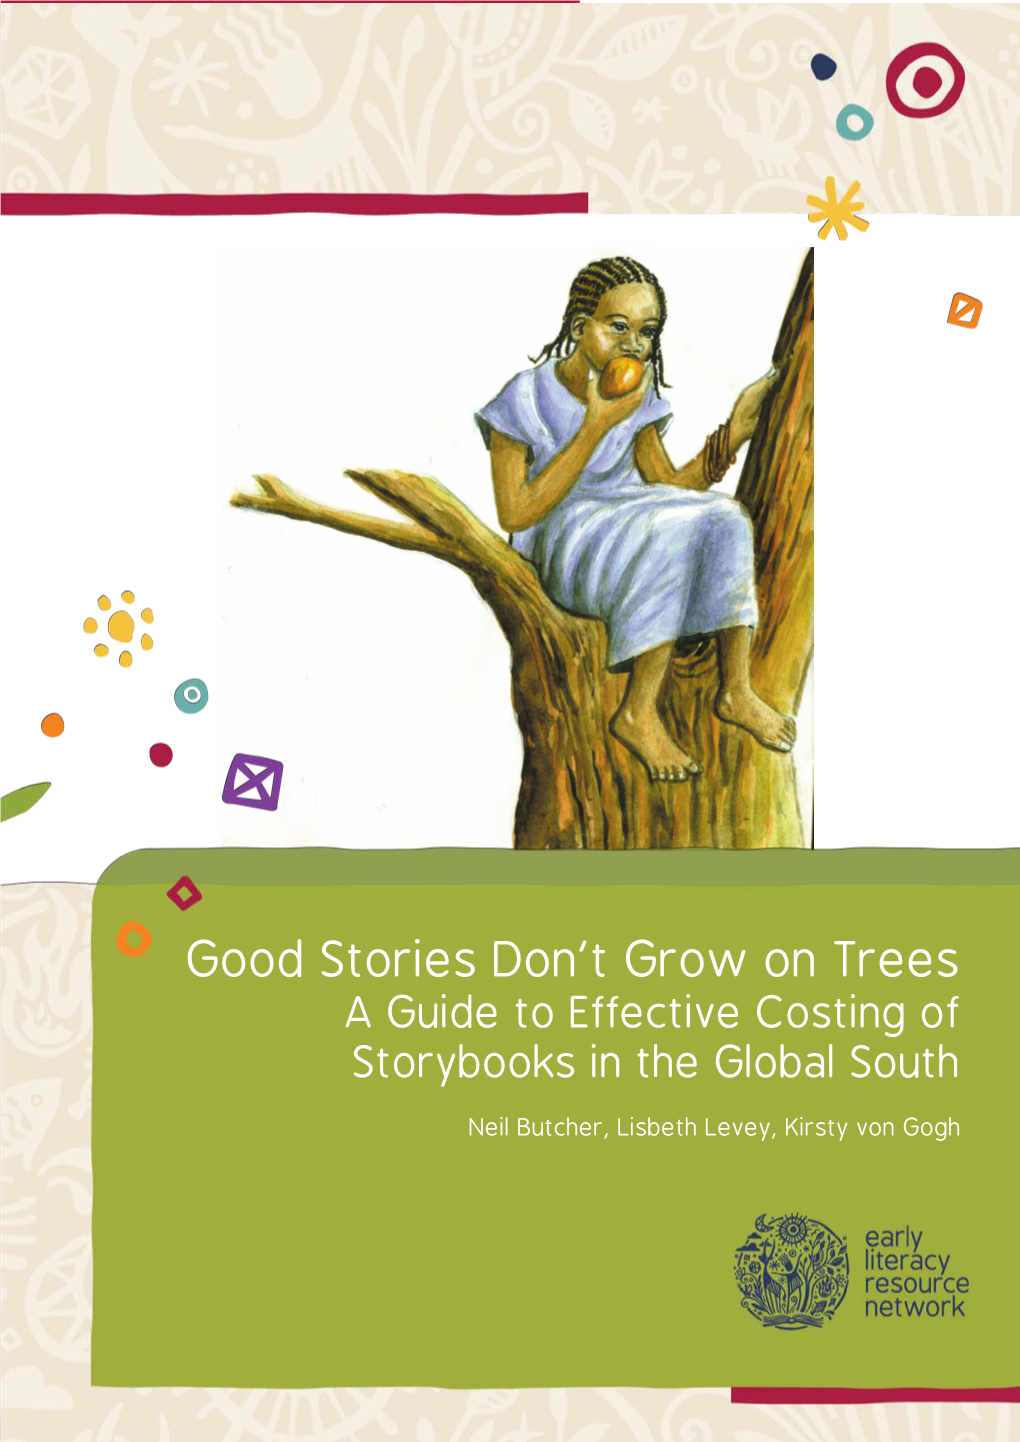 Good Stories Don't Grow on Trees V2 1.17